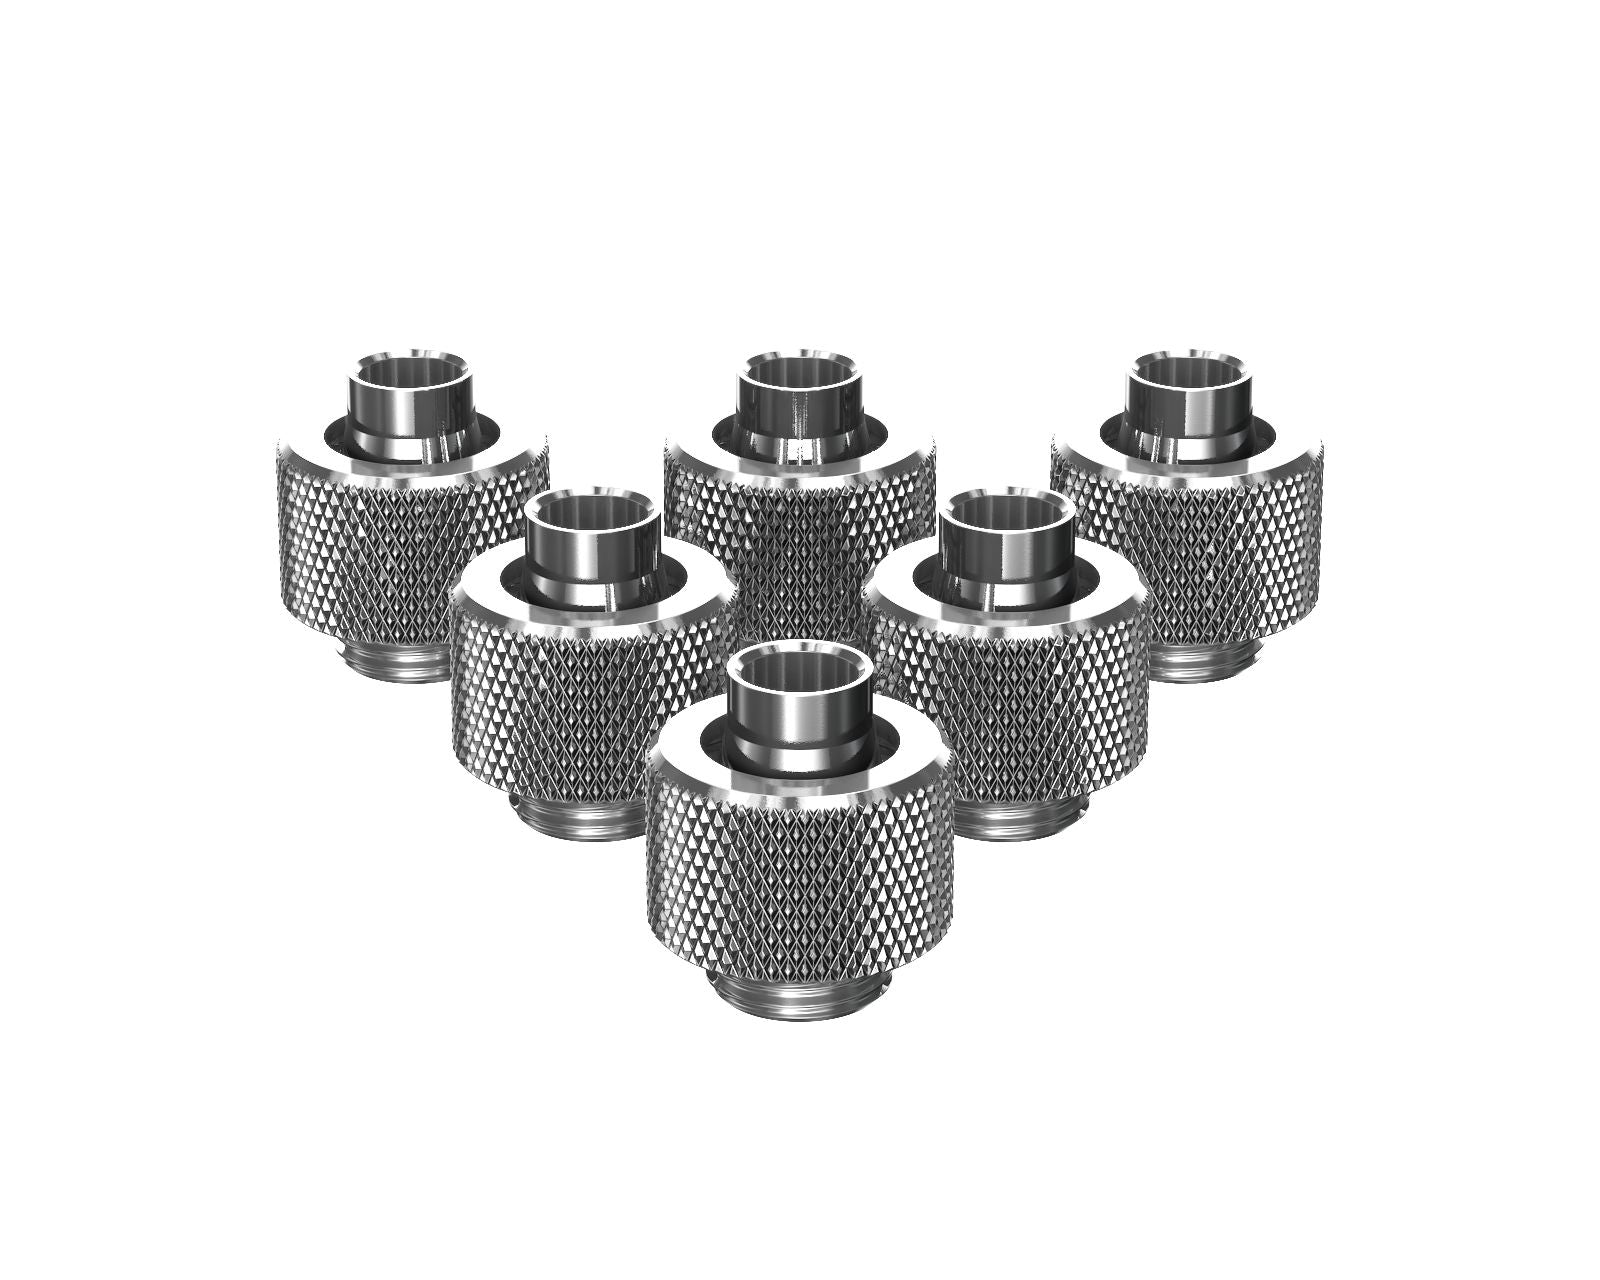 PrimoChill SecureFit SX - Premium Compression Fitting For 3/8in ID x 1/2in OD Flexible Tubing 6 Pack (F-SFSX12-6) - Available in 20+ Colors, Custom Watercooling Loop Ready - Silver Nickel